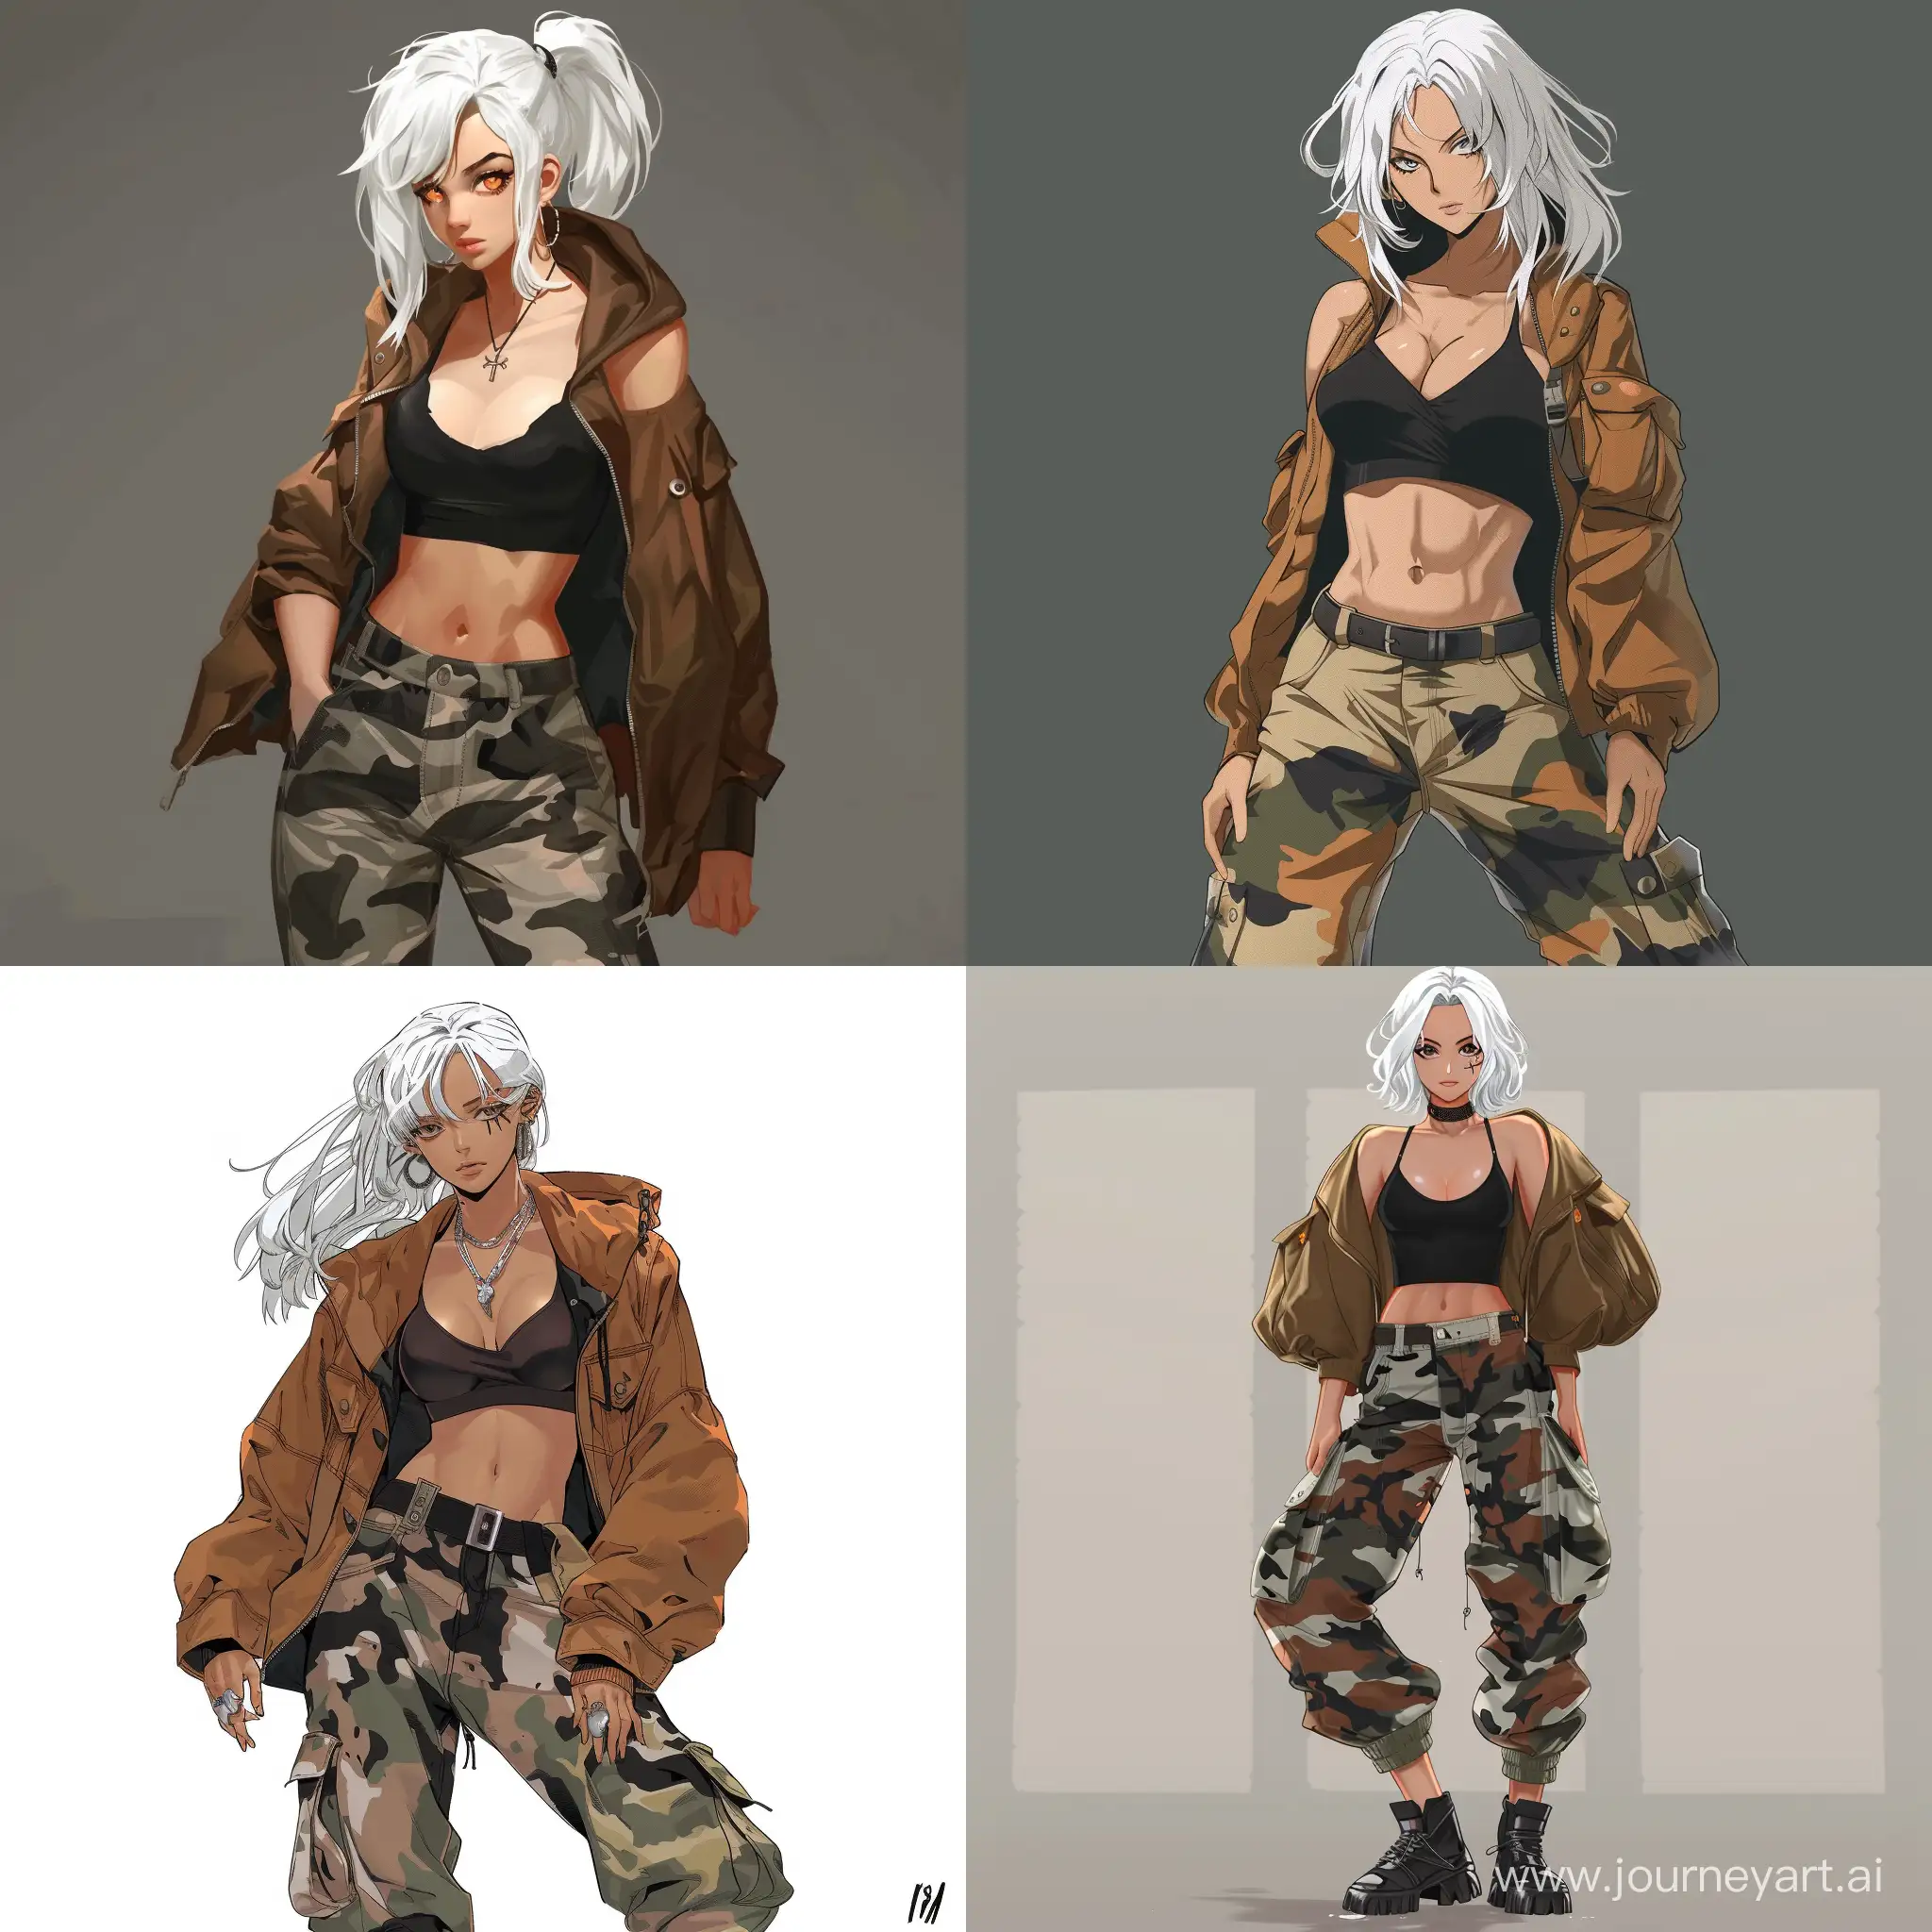 Stylish-Girl-in-Camouflage-Pants-and-One-PieceInspired-Outfit